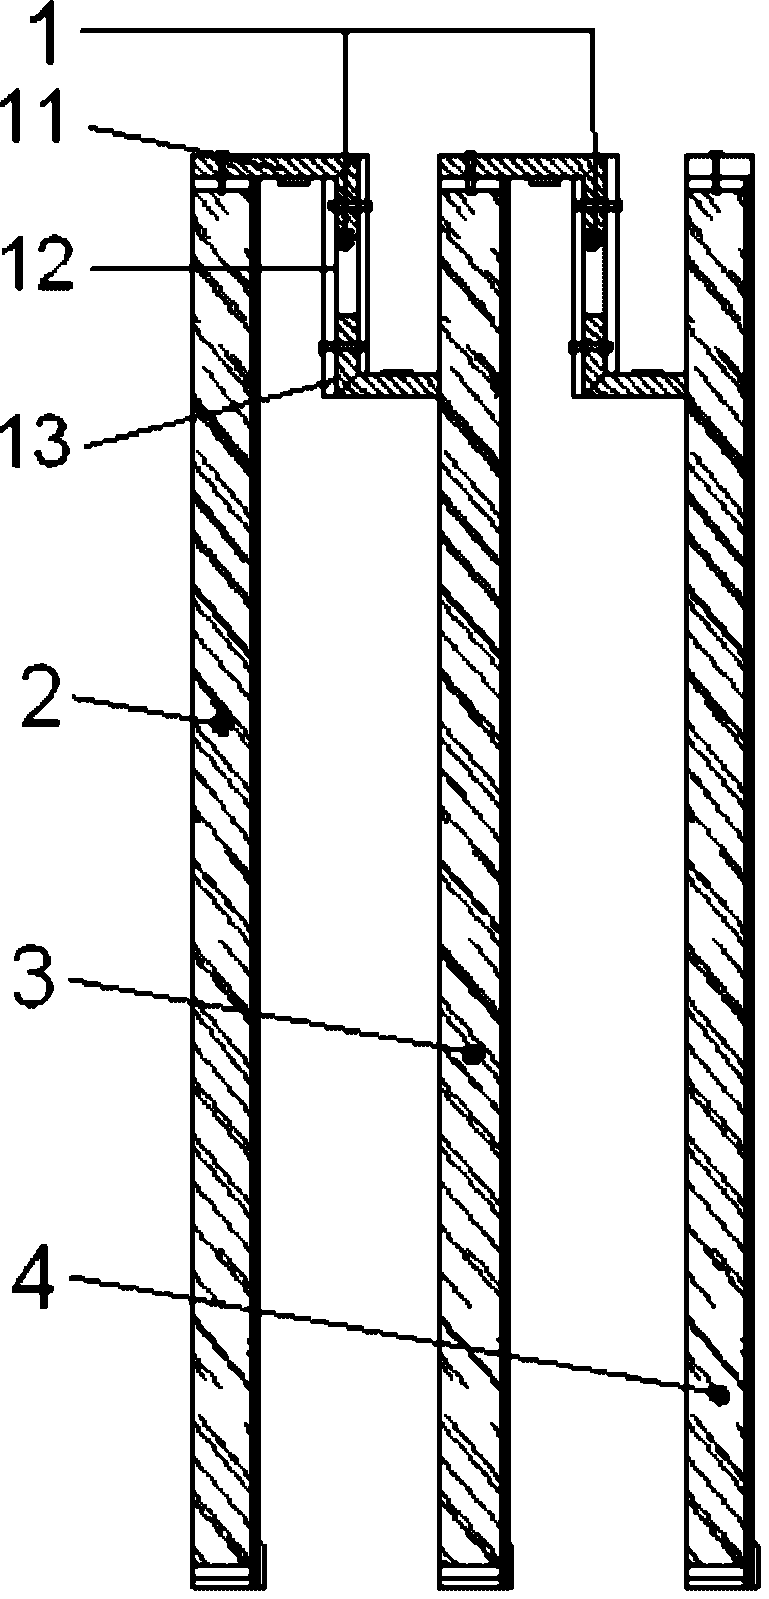 Sound absorption unit capable of being installed quickly